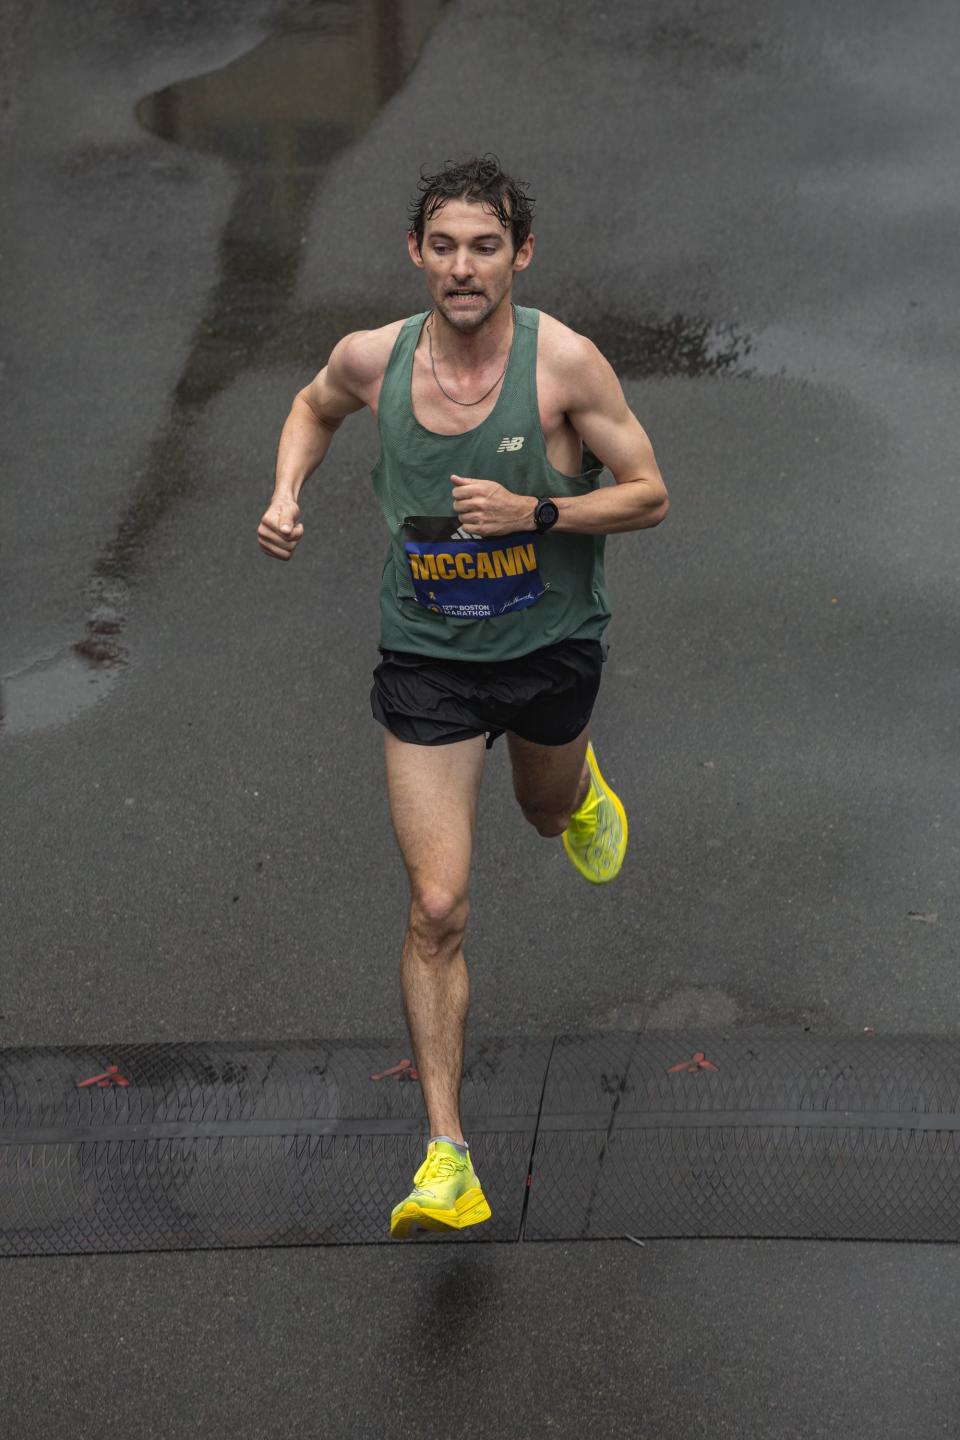 Westerly's Andrew McCann at the finish of the Boston Marathon, placing 32nd out of 30,000 runners.